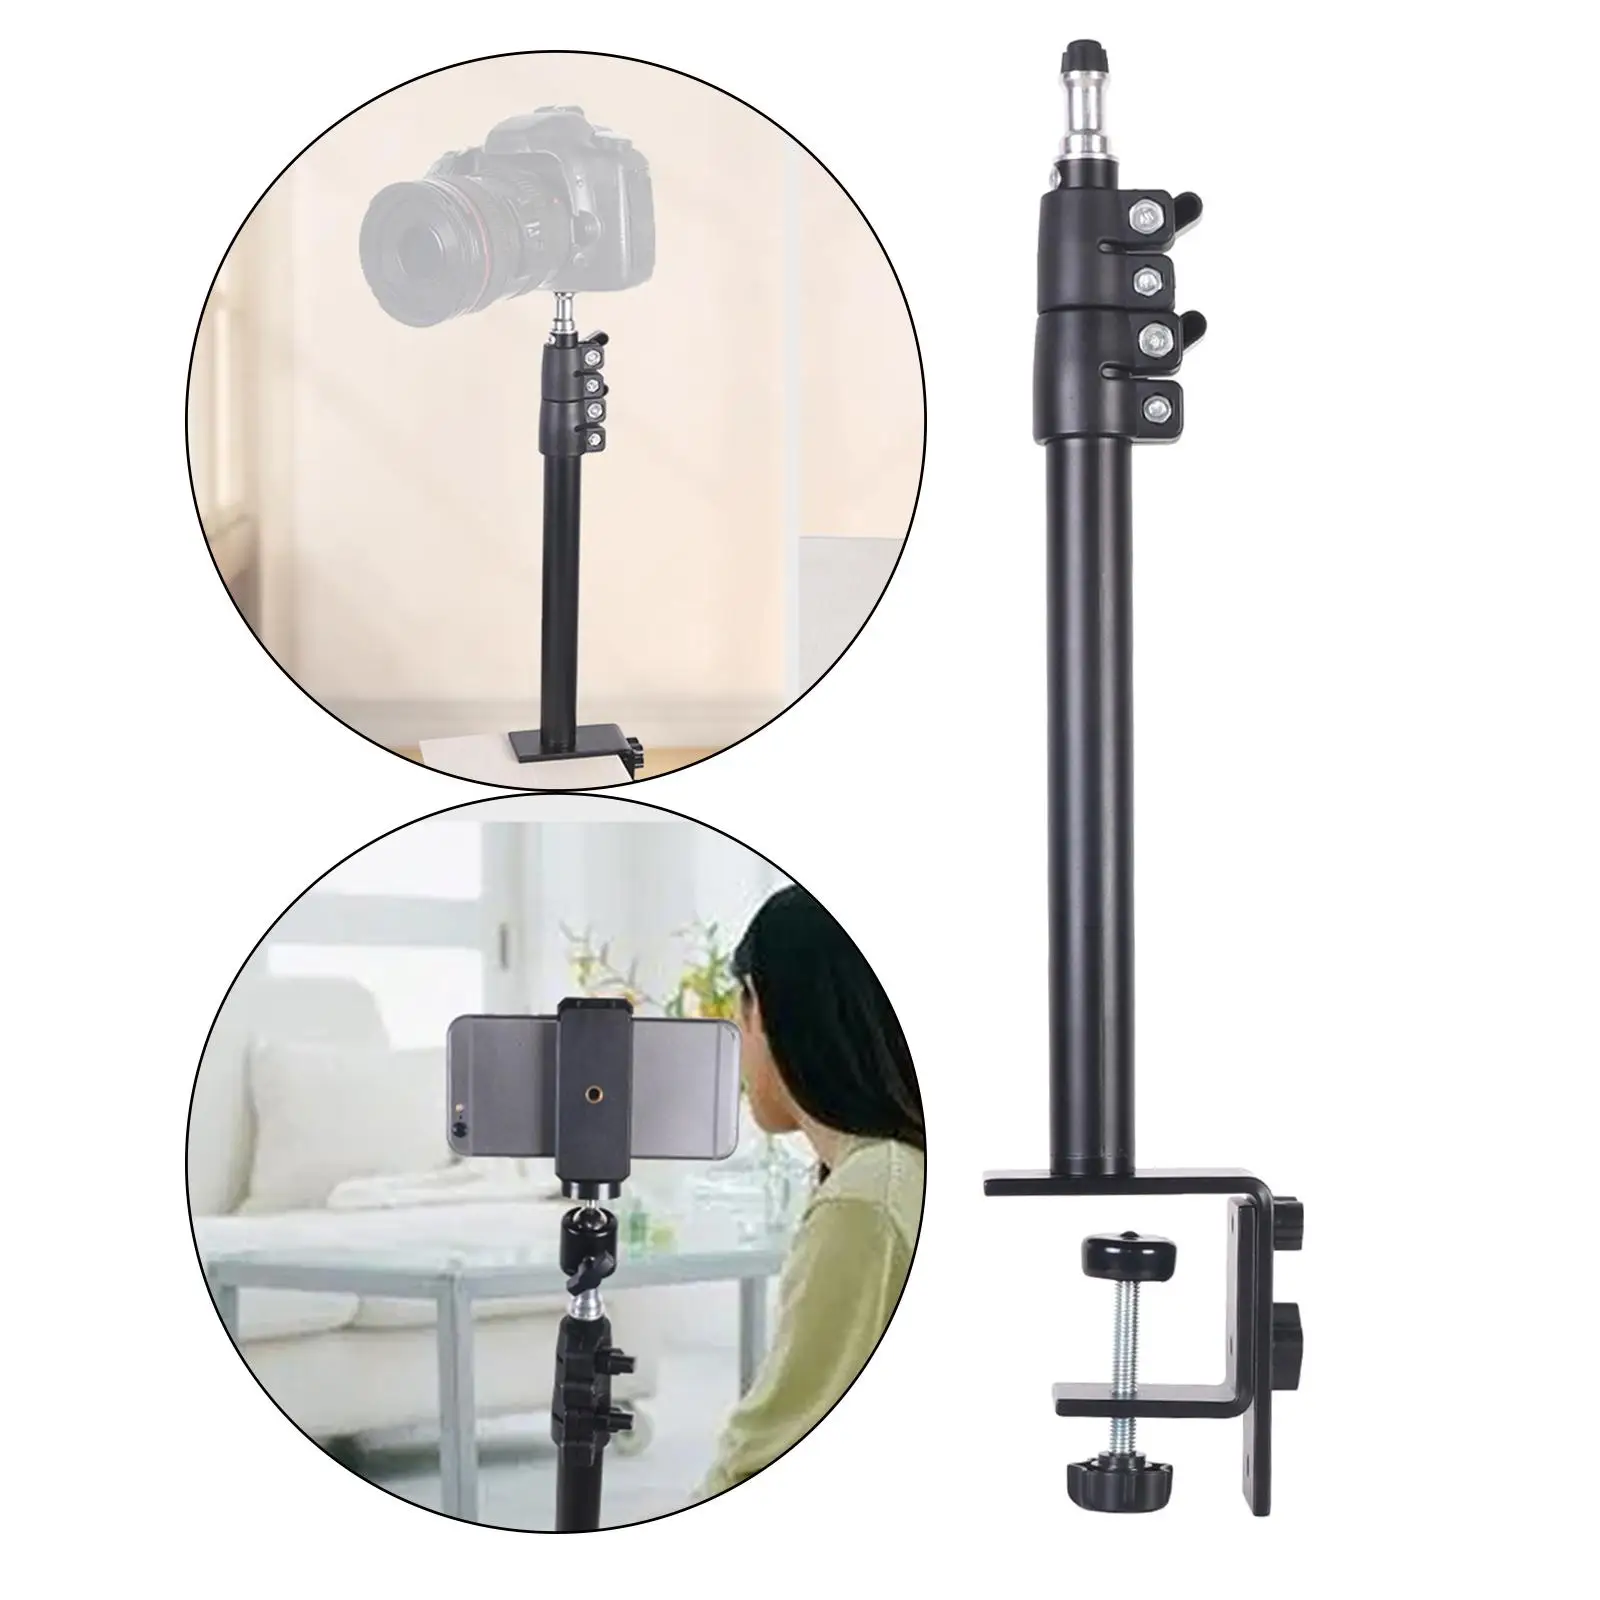 Desk Mount Stand Tabletop L clamp Mounting Adjustable Table Stand Aluminum for DSLR Camera light Panel Light Mic